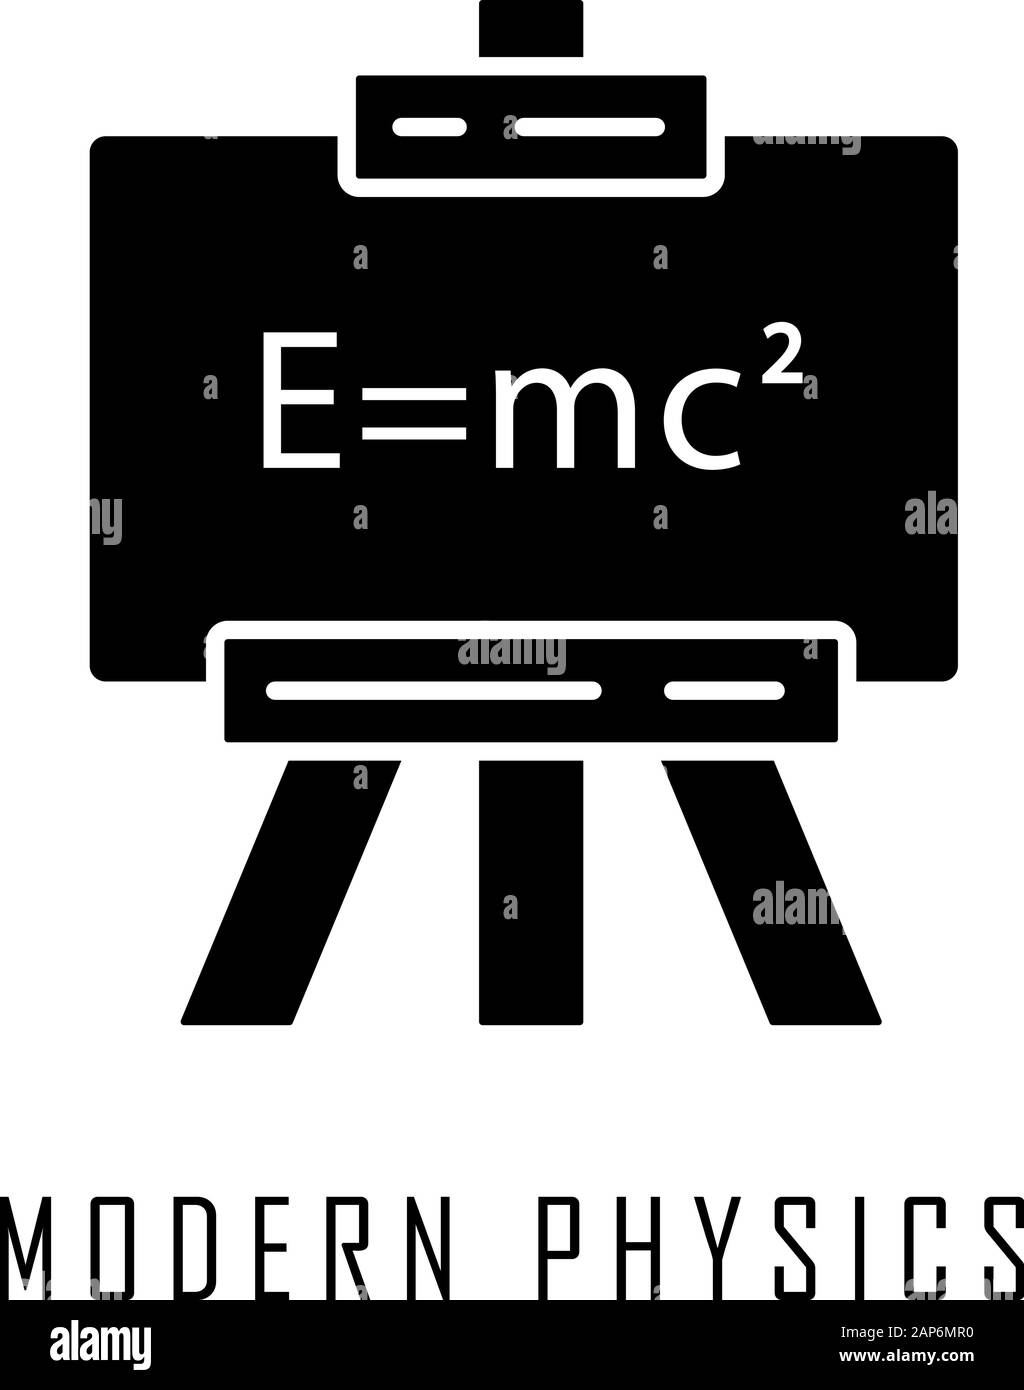 Modern physics glyph icon. Theory of relativity and quantum mechanics. Up-to-date physics and learning. Einstein formula on whiteboard. Silhouette sym Stock Vector